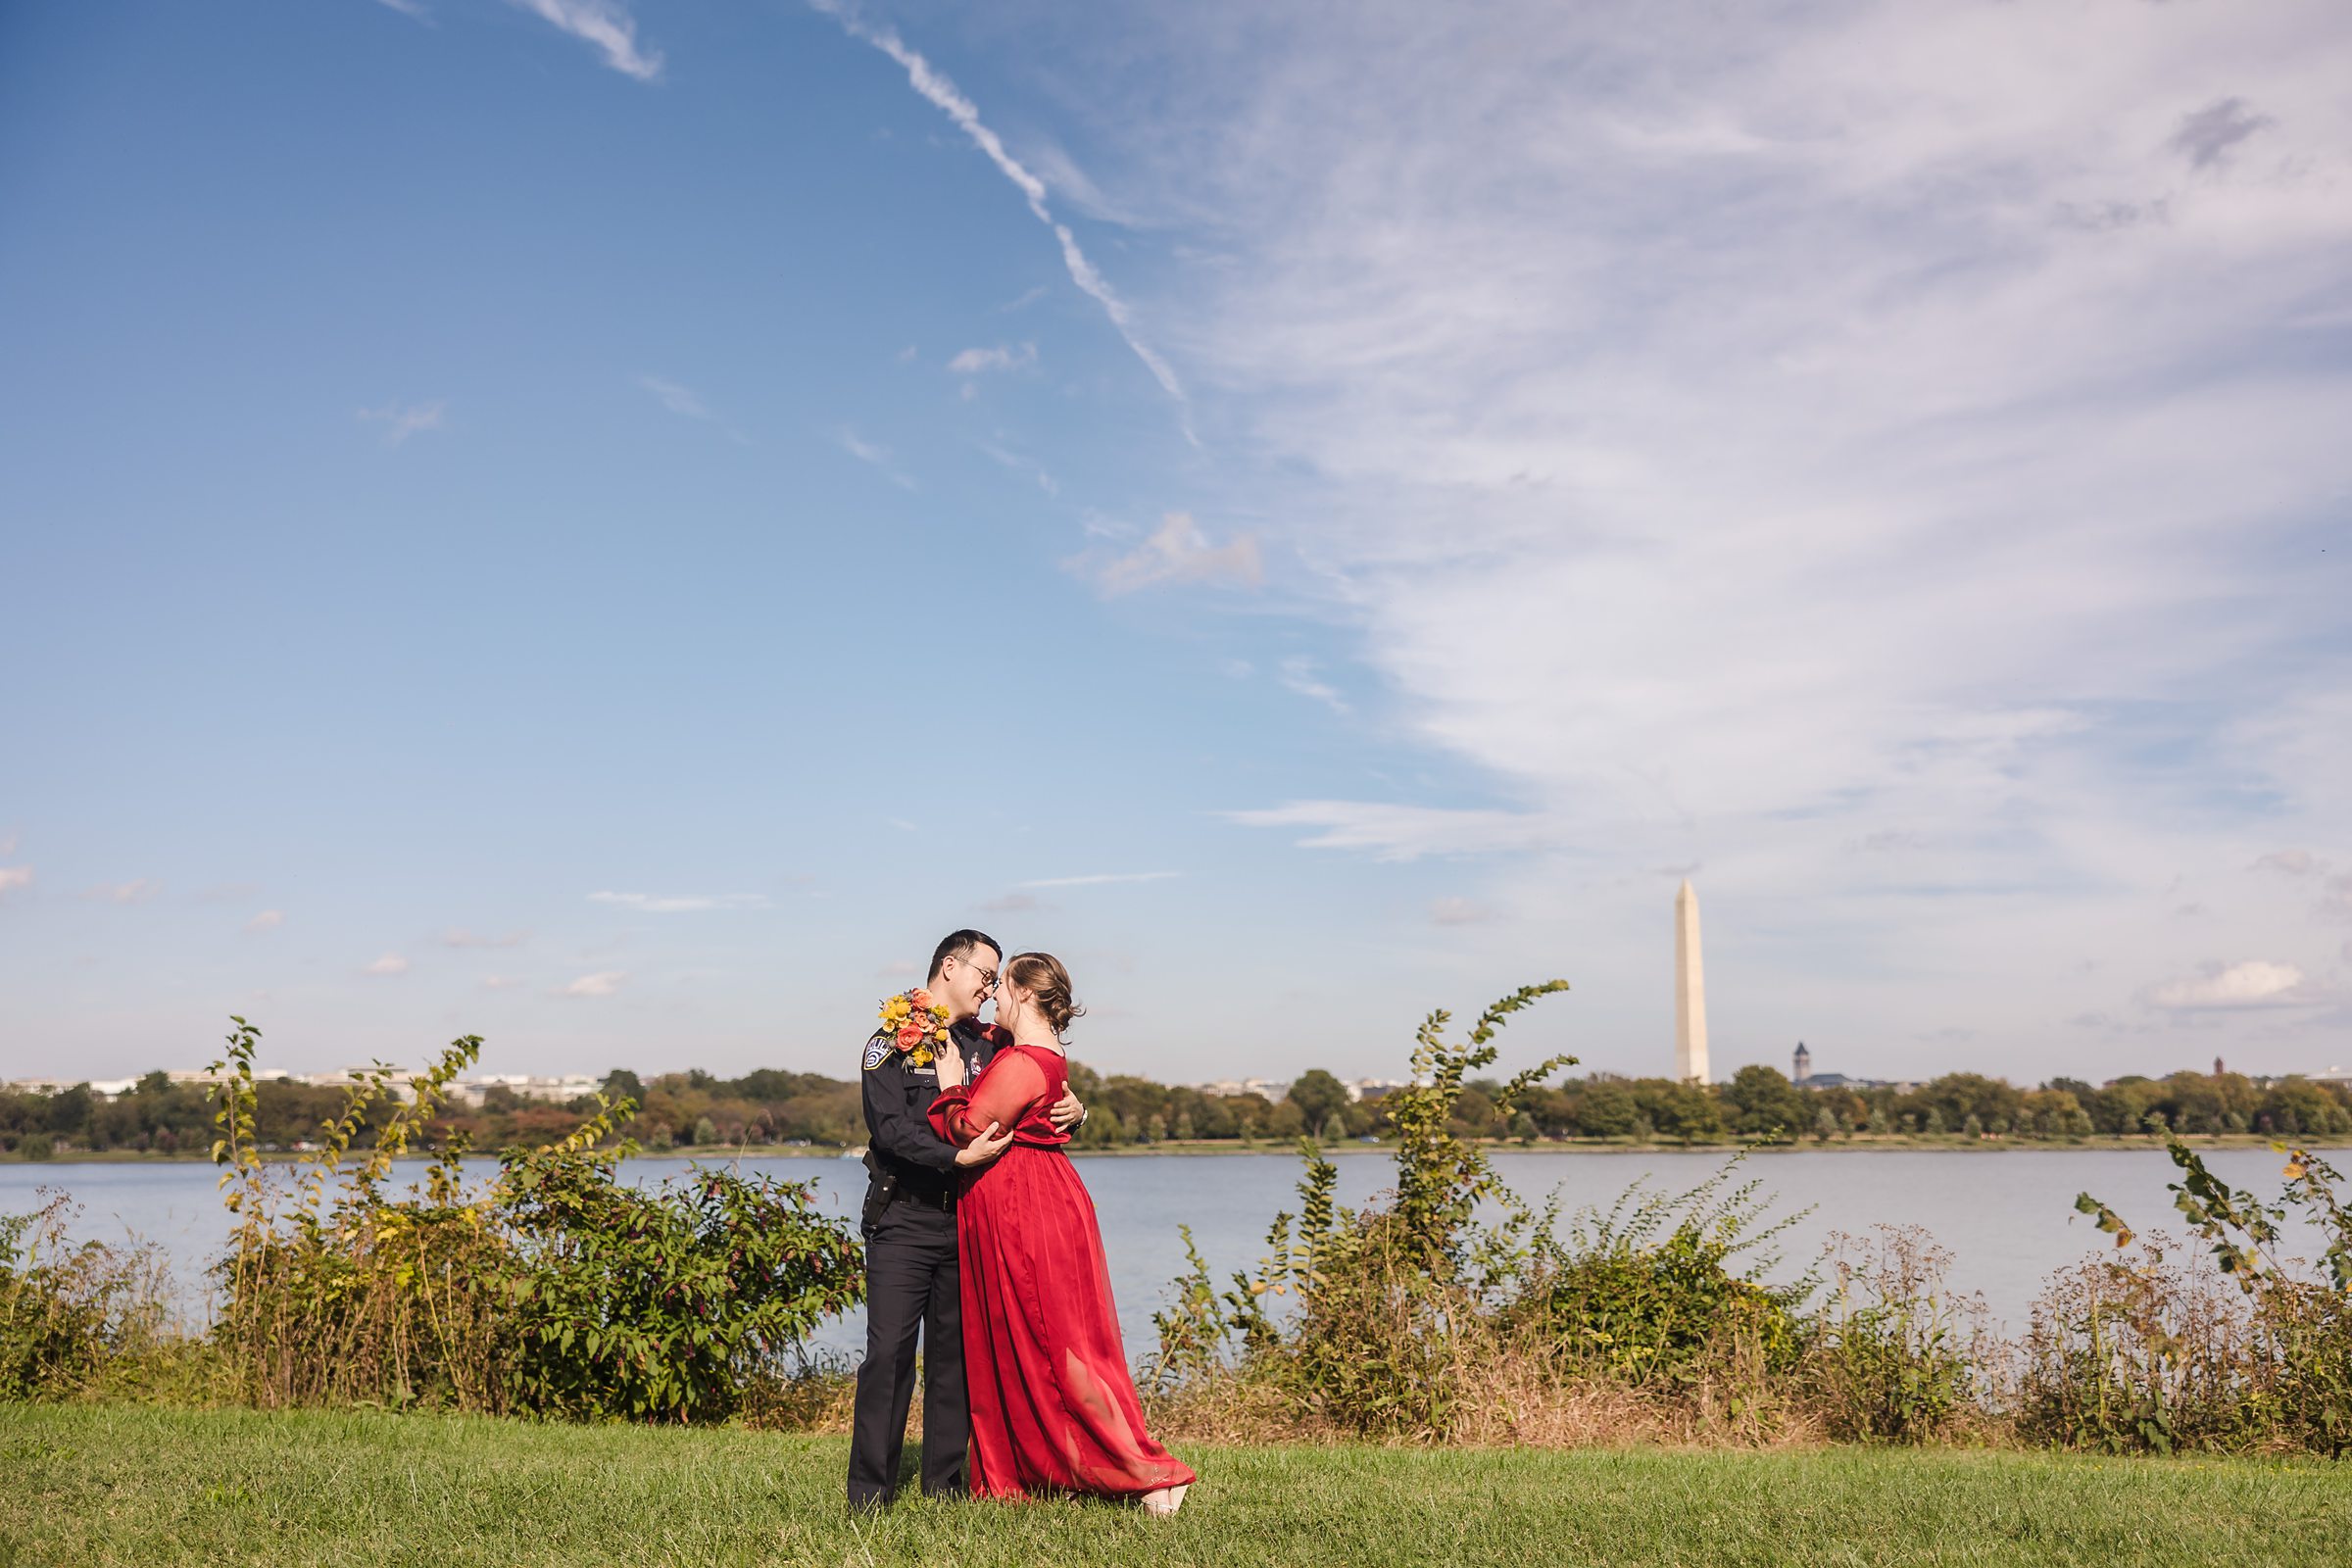 Bride and groom embrace during their wedding in Washington D.C.